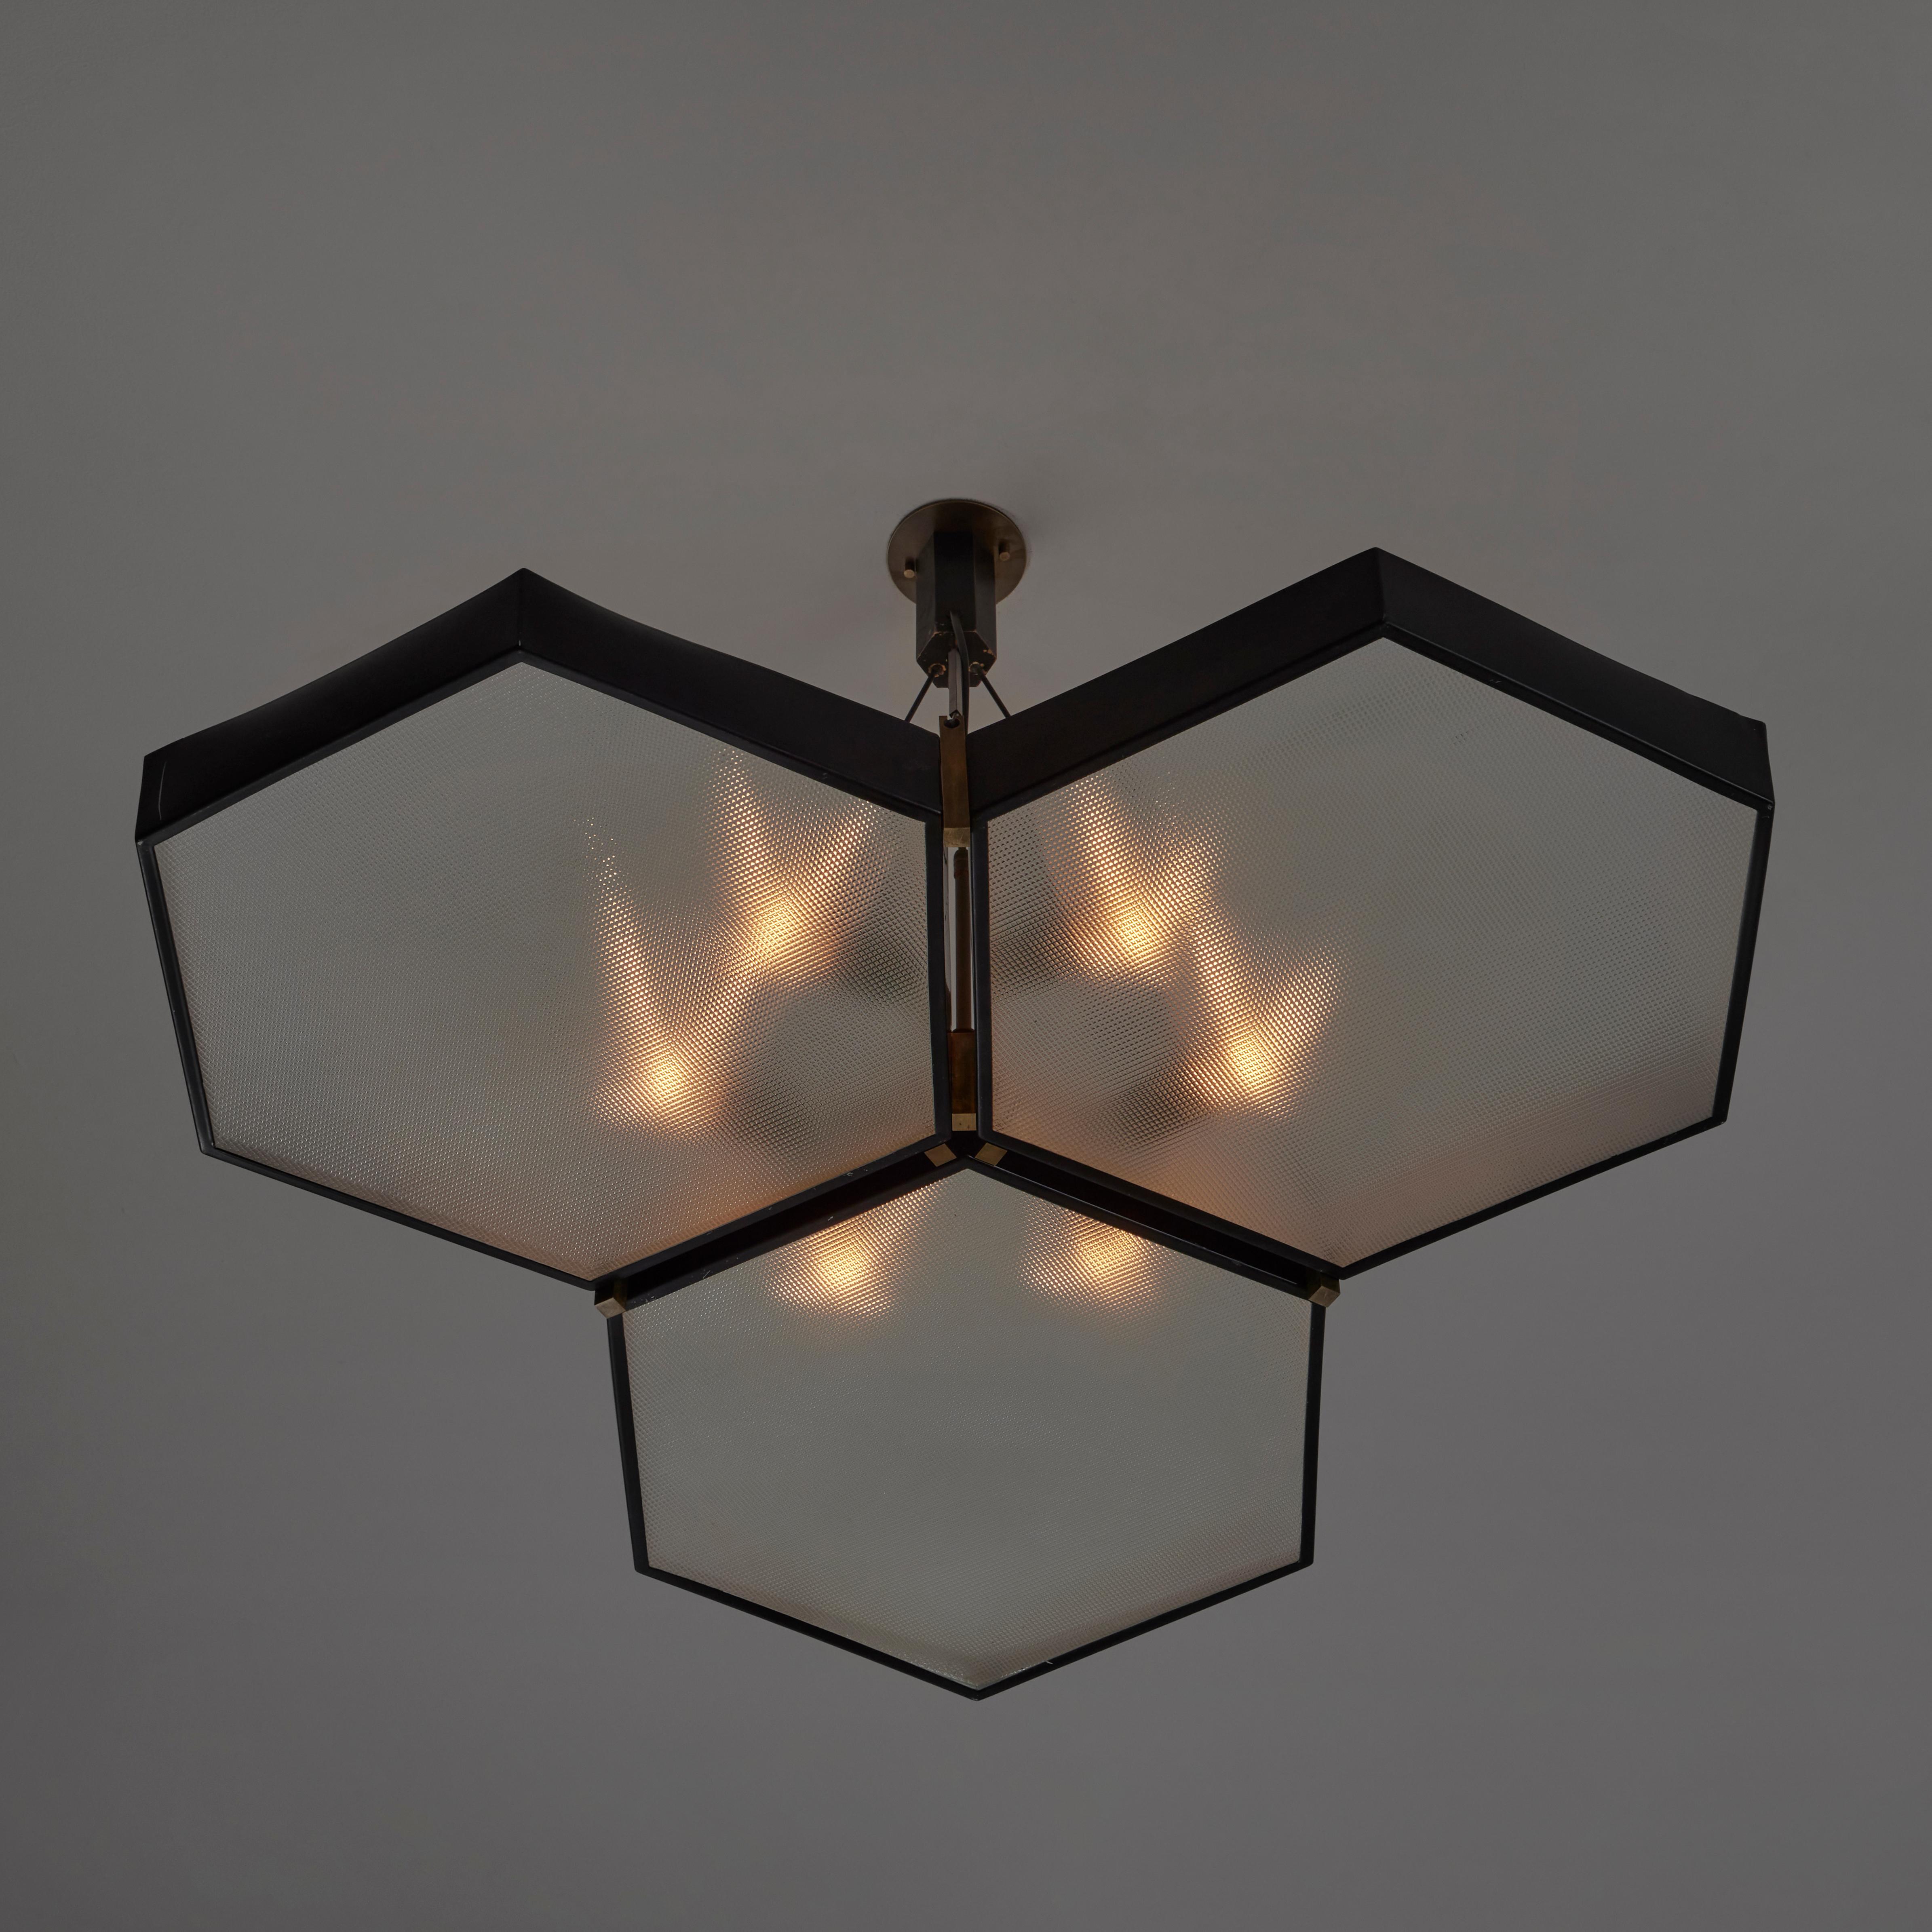 Rare and Large Chandelier by G.C.M.E. Designed and manufactured in Italy, circa 1960. Geometric chandelier with enameled steel frame and three hexagonal textured glass shades. Please note there are minor connection areas from glass to frame that are